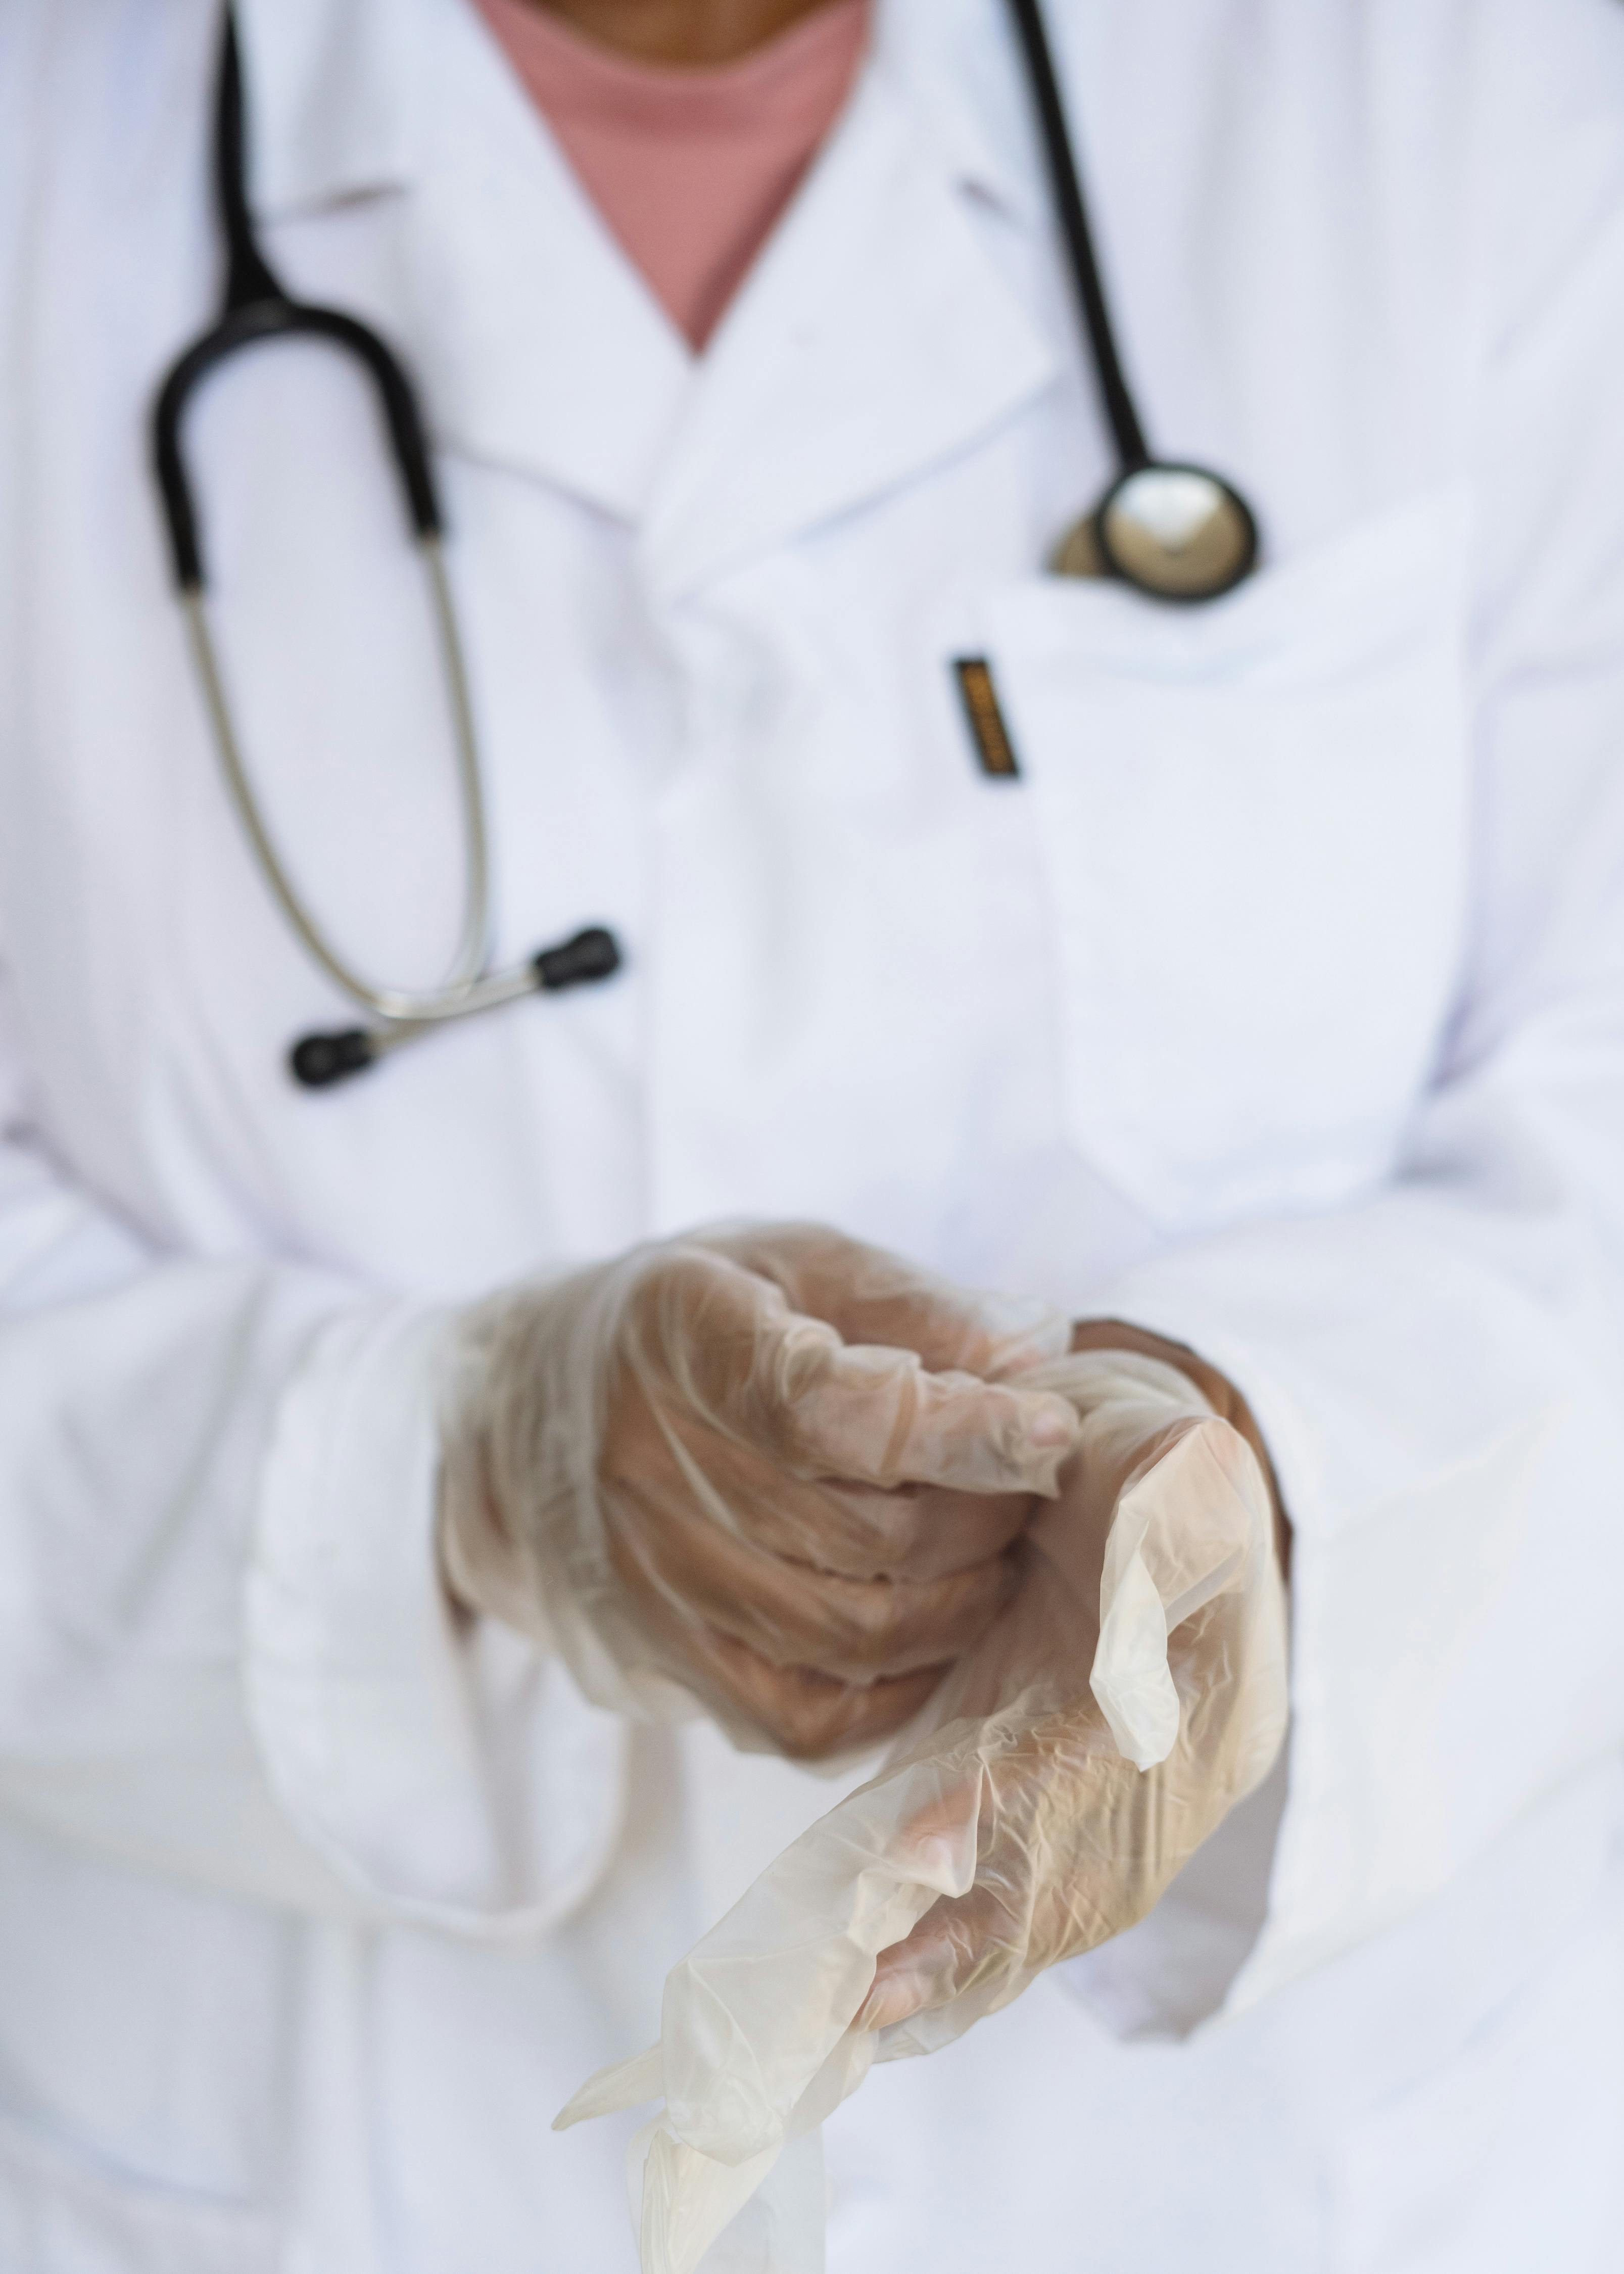 Crop doctor with stethoscope preparing for surgery in hospital · Free Stock  Photo